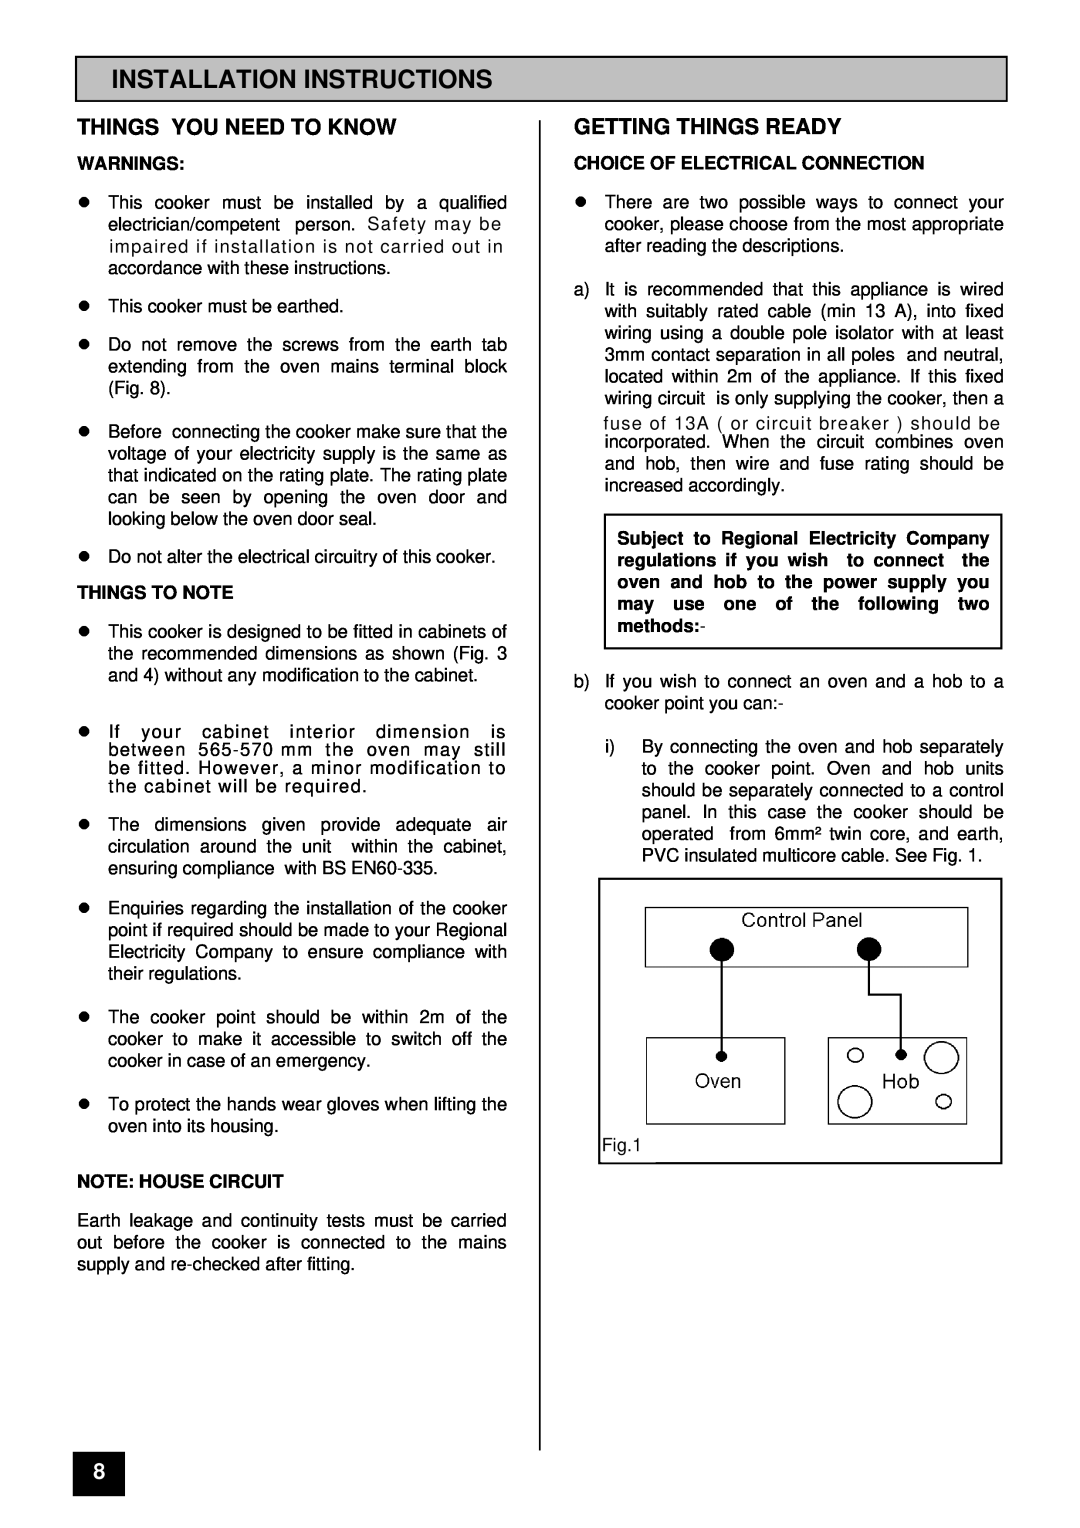 Tricity Bendix BS 611/BS 621 Installation Instructions, Things You Need To Know, Getting Things Ready, Warnings 